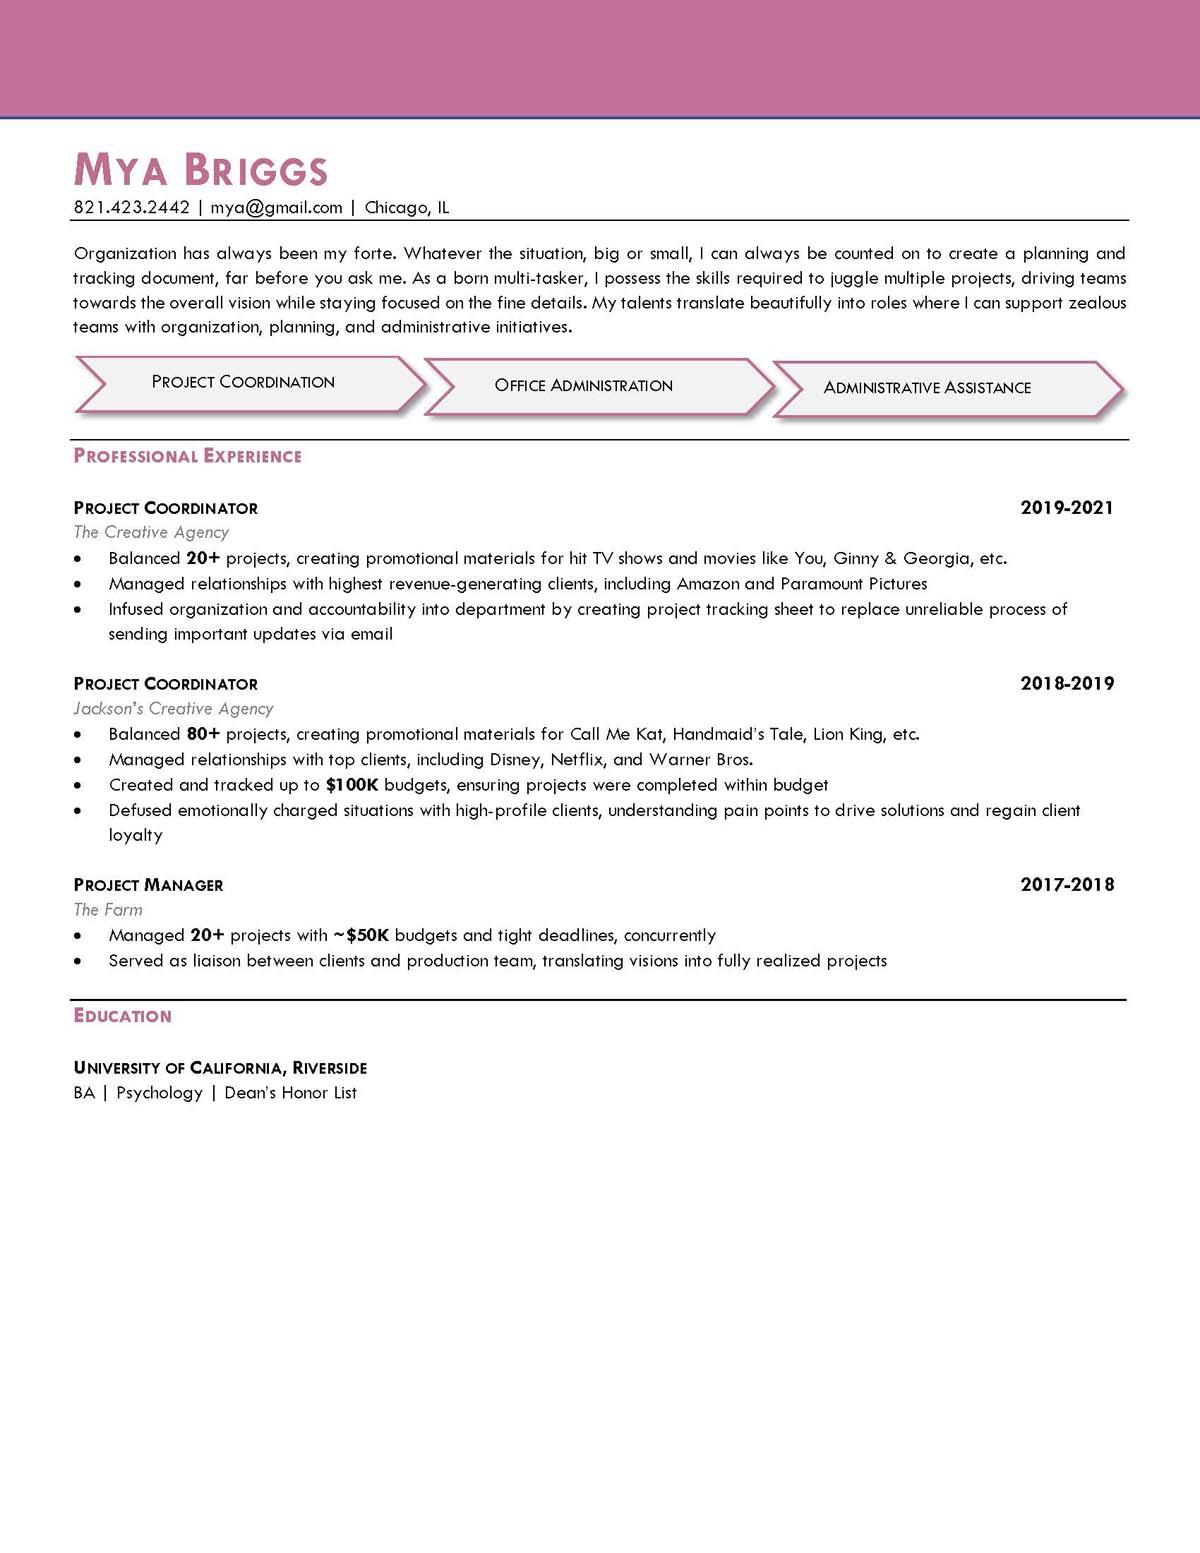 Sample resume: Project Management, Mid Experience, Chronological